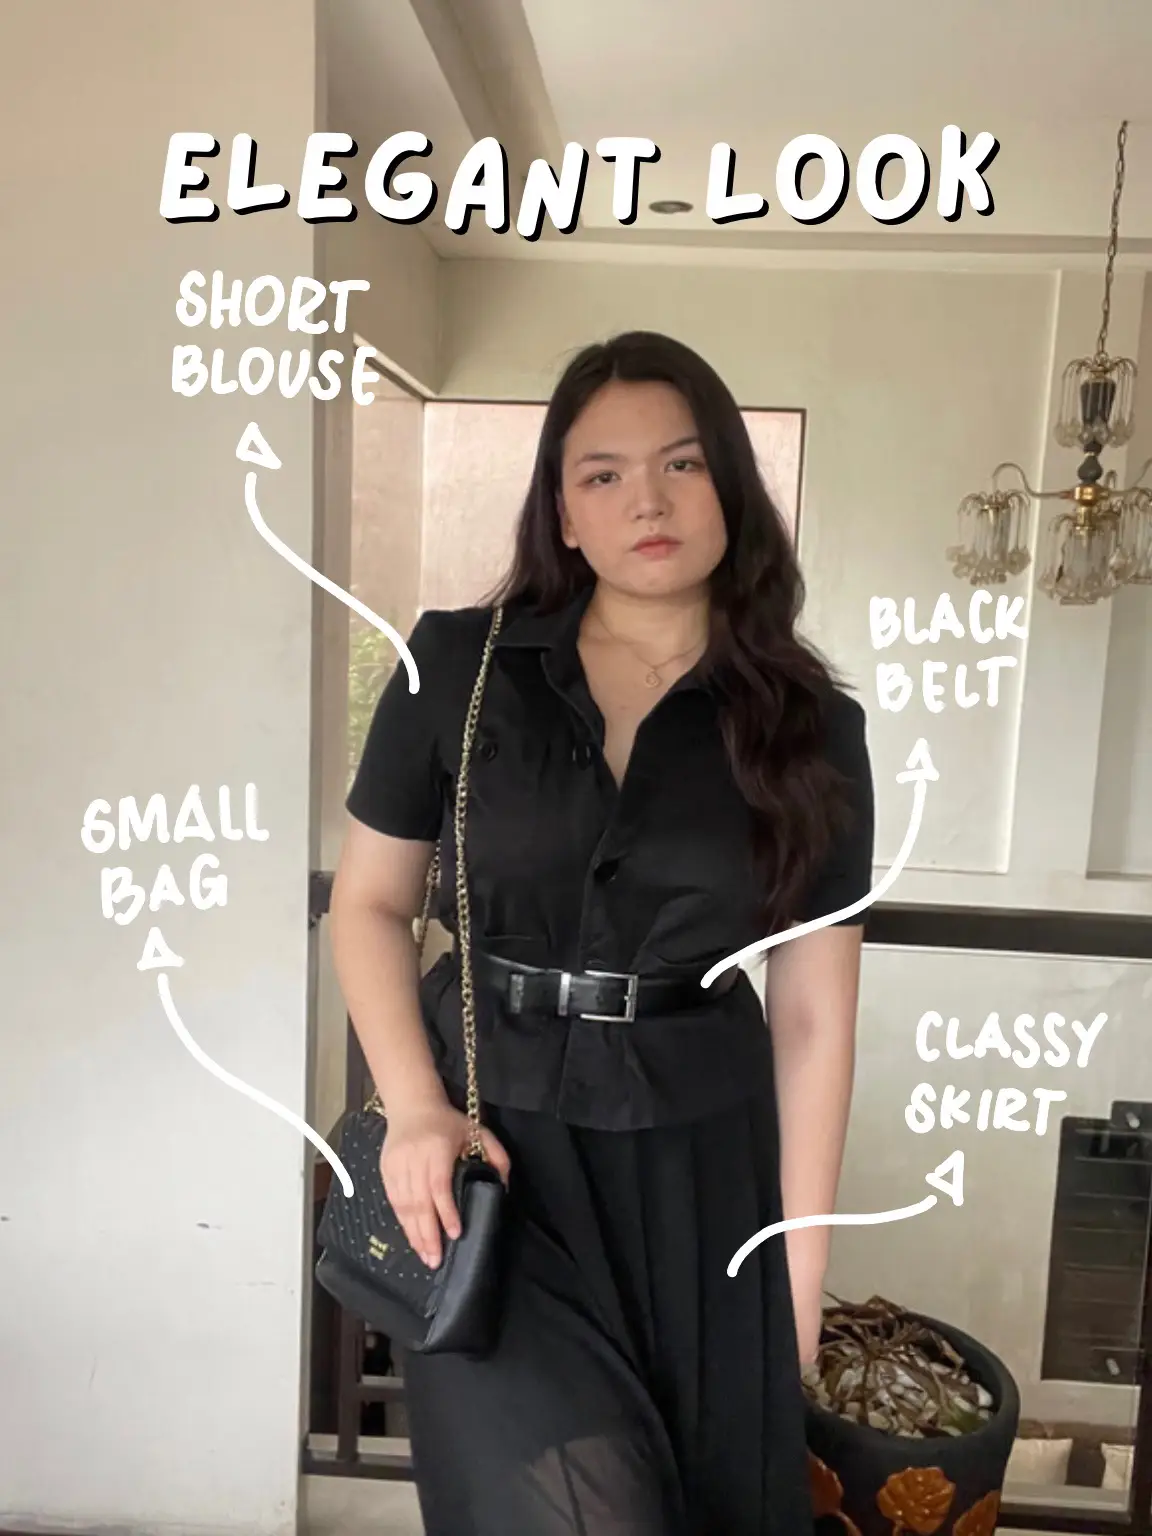 3 Skirts, 3 Outfits For Chubby Girls! 🤍, Gallery posted by Angela Fortes